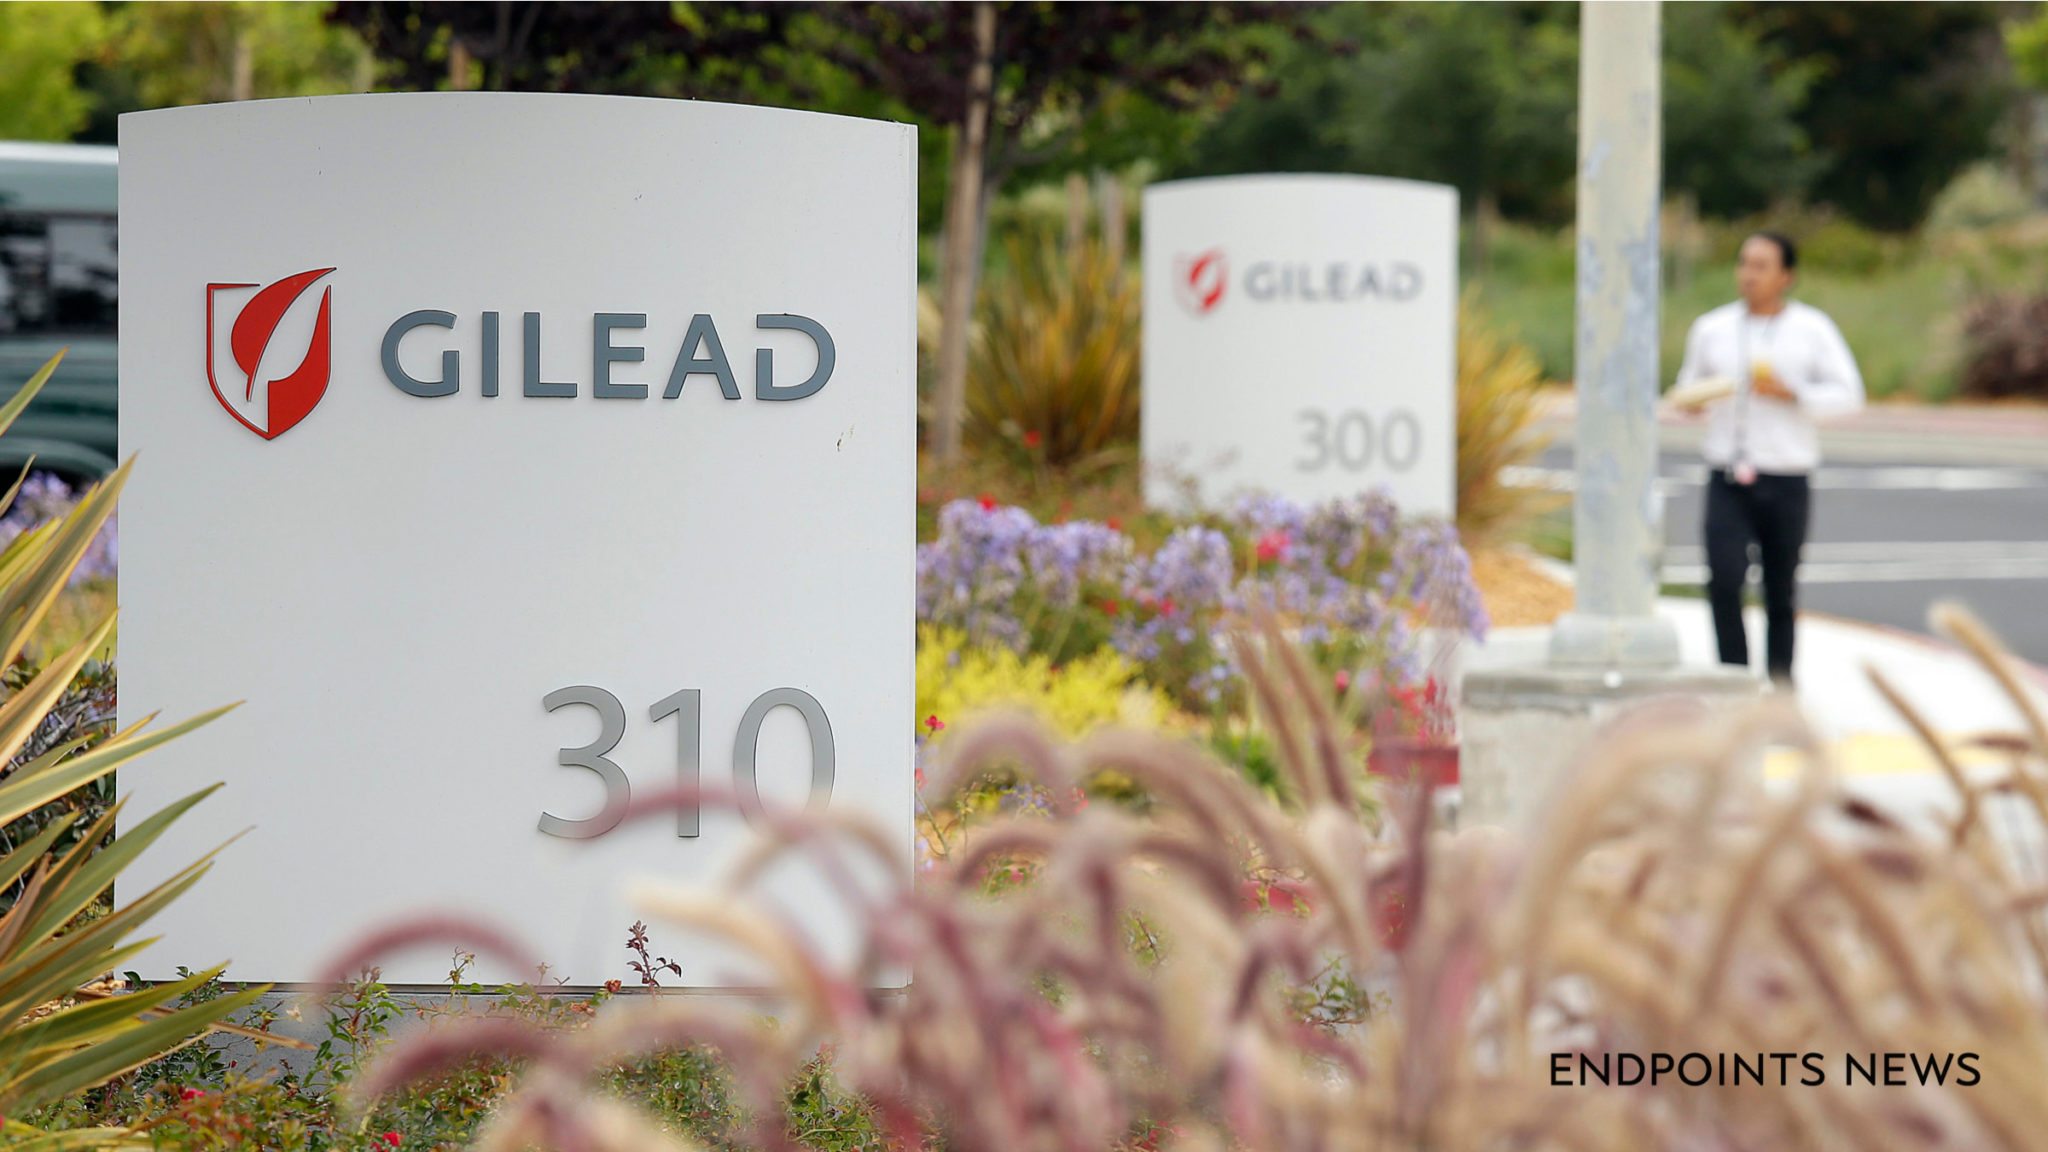 Gilead fortifies its pioneering cell therapy status, expanding into three new facilities and teaming with NCI